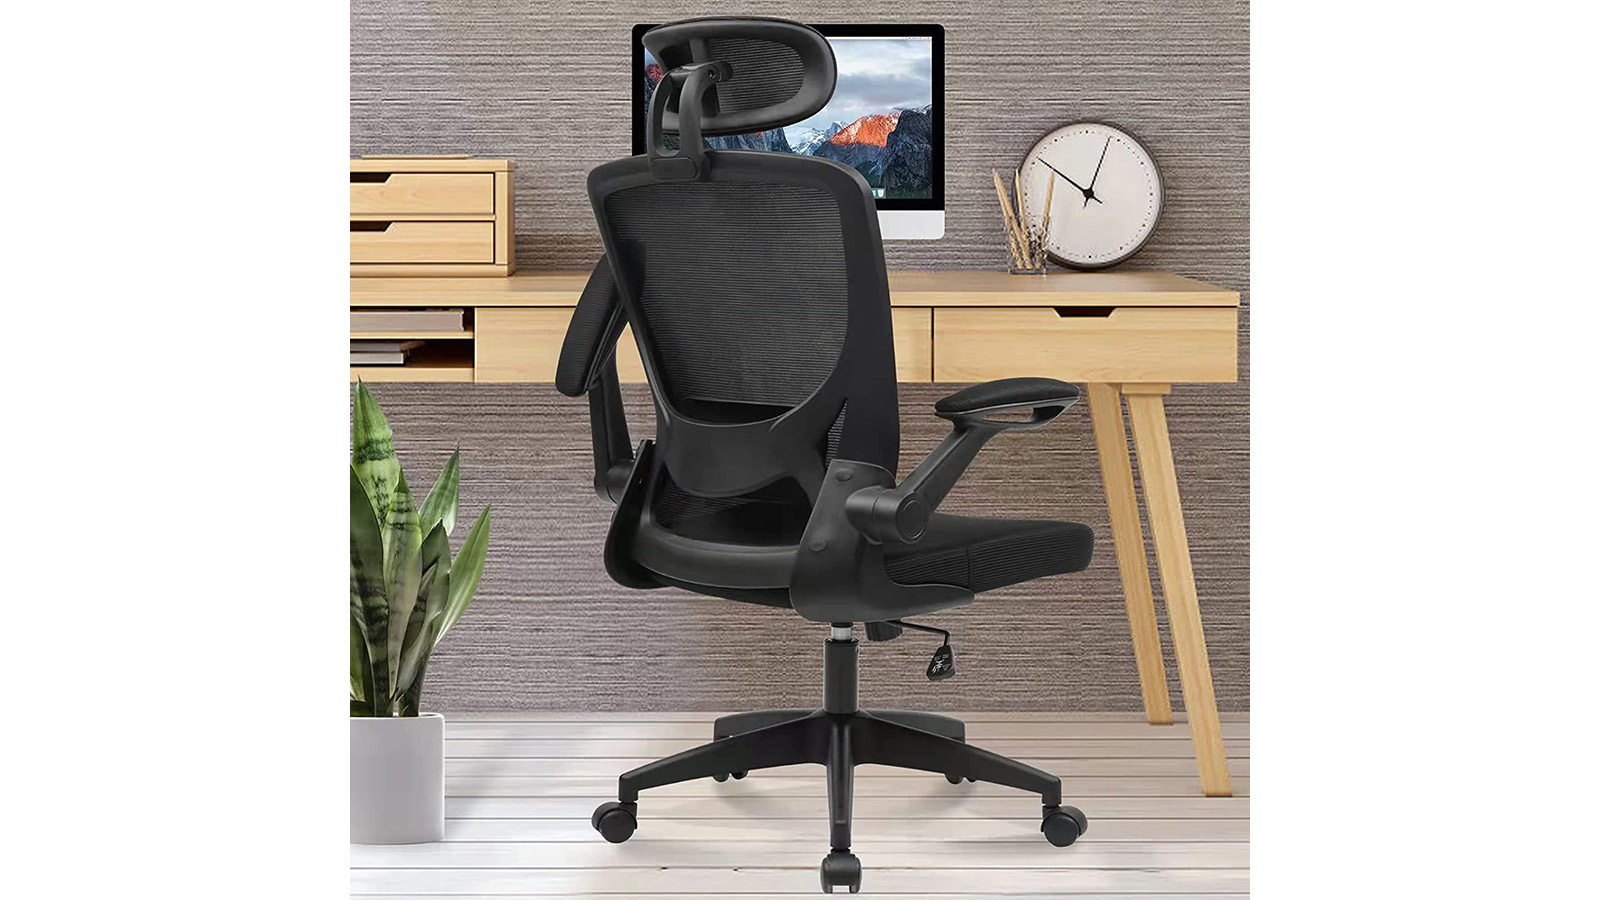 KERDOM Office Chair: Adjustable Armrests and Headrest